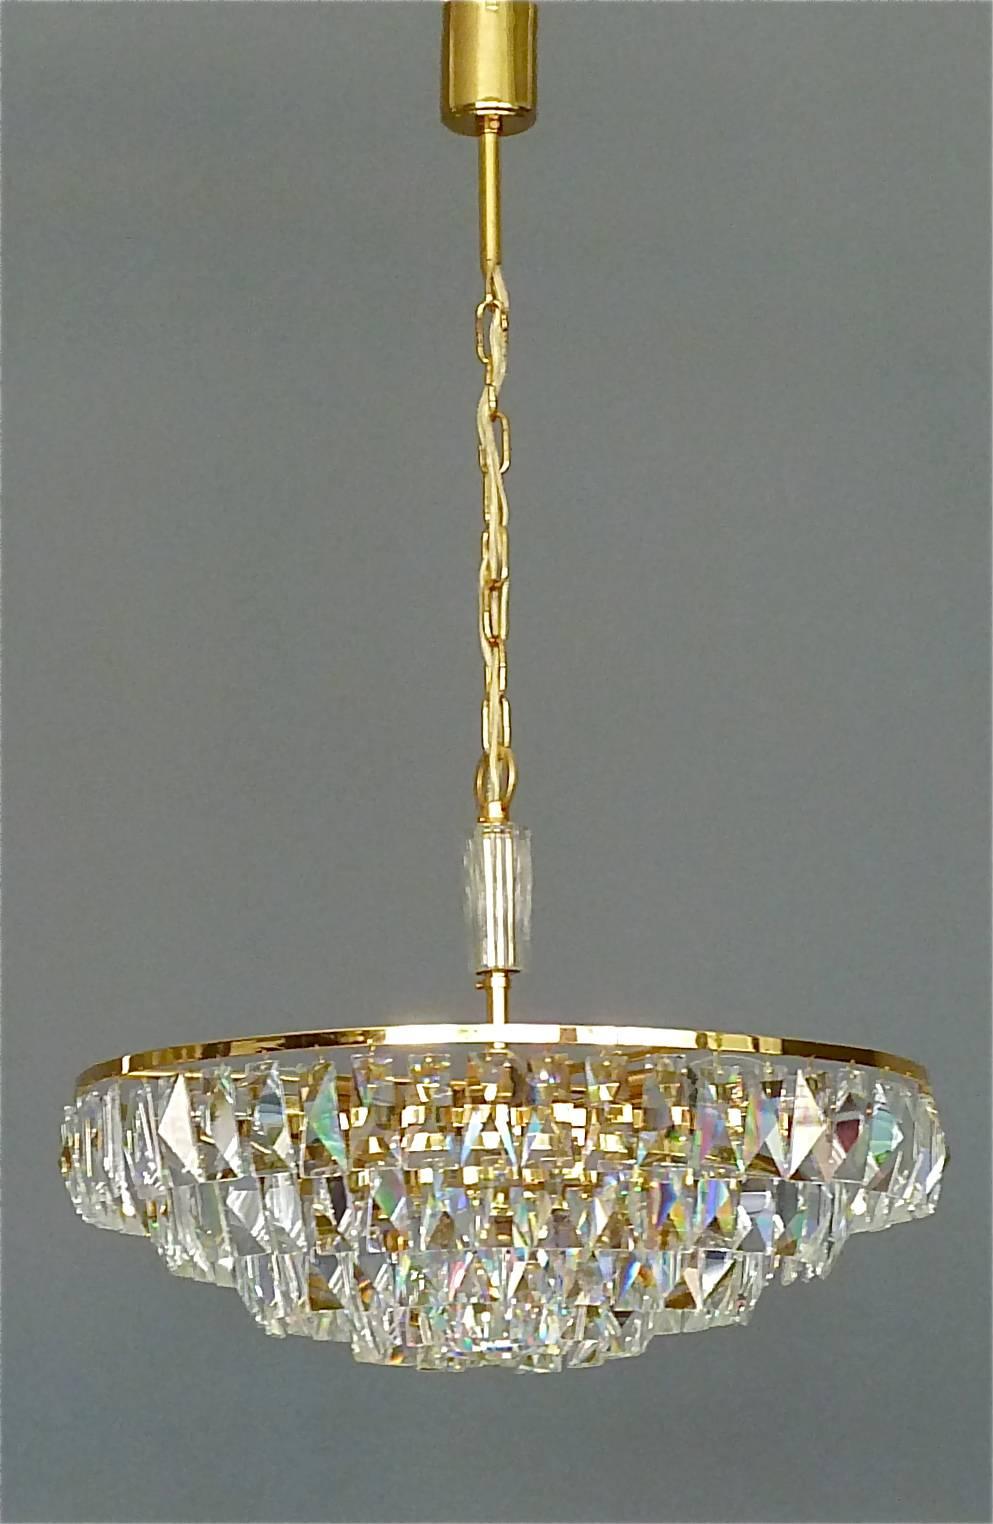 Fine large gilt brass and crystal glass chandelier made by Palwa, Germany, circa 1960. The chain-hanging length-adjustable chandelier has a crystal glass stem in the center and five gilt brass metal rings with lots of high lead hand-cut faceted